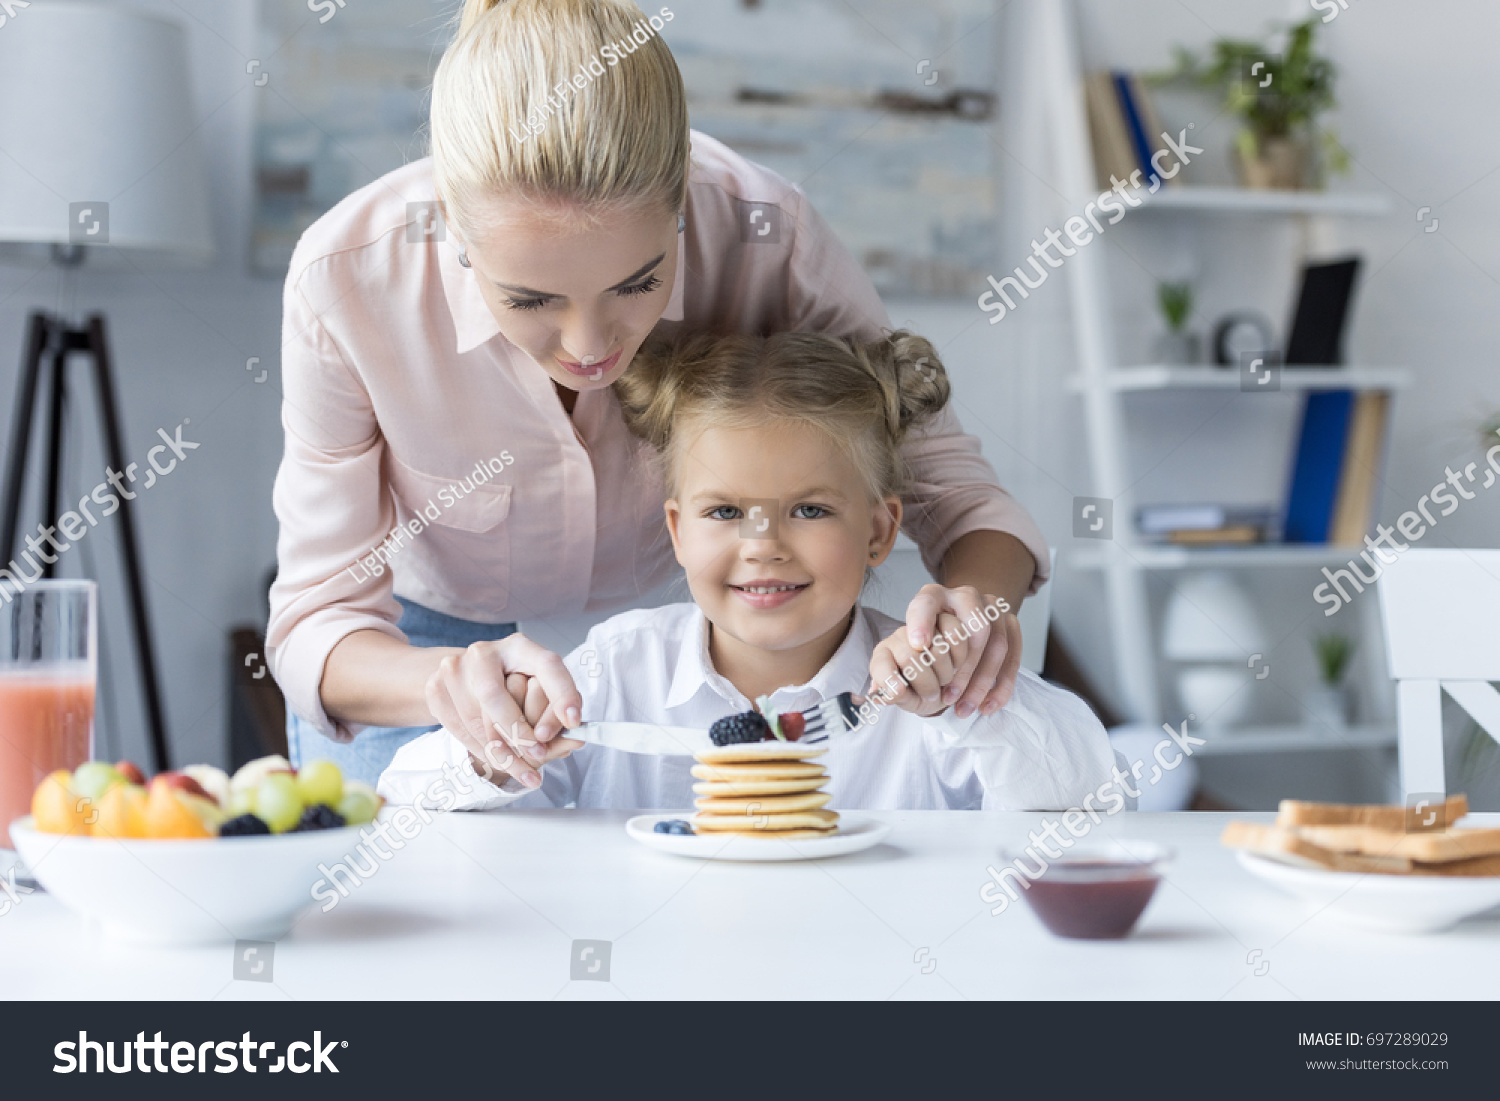 smiling young mother with cute little daughter eating pancakes for breakfast #697289029